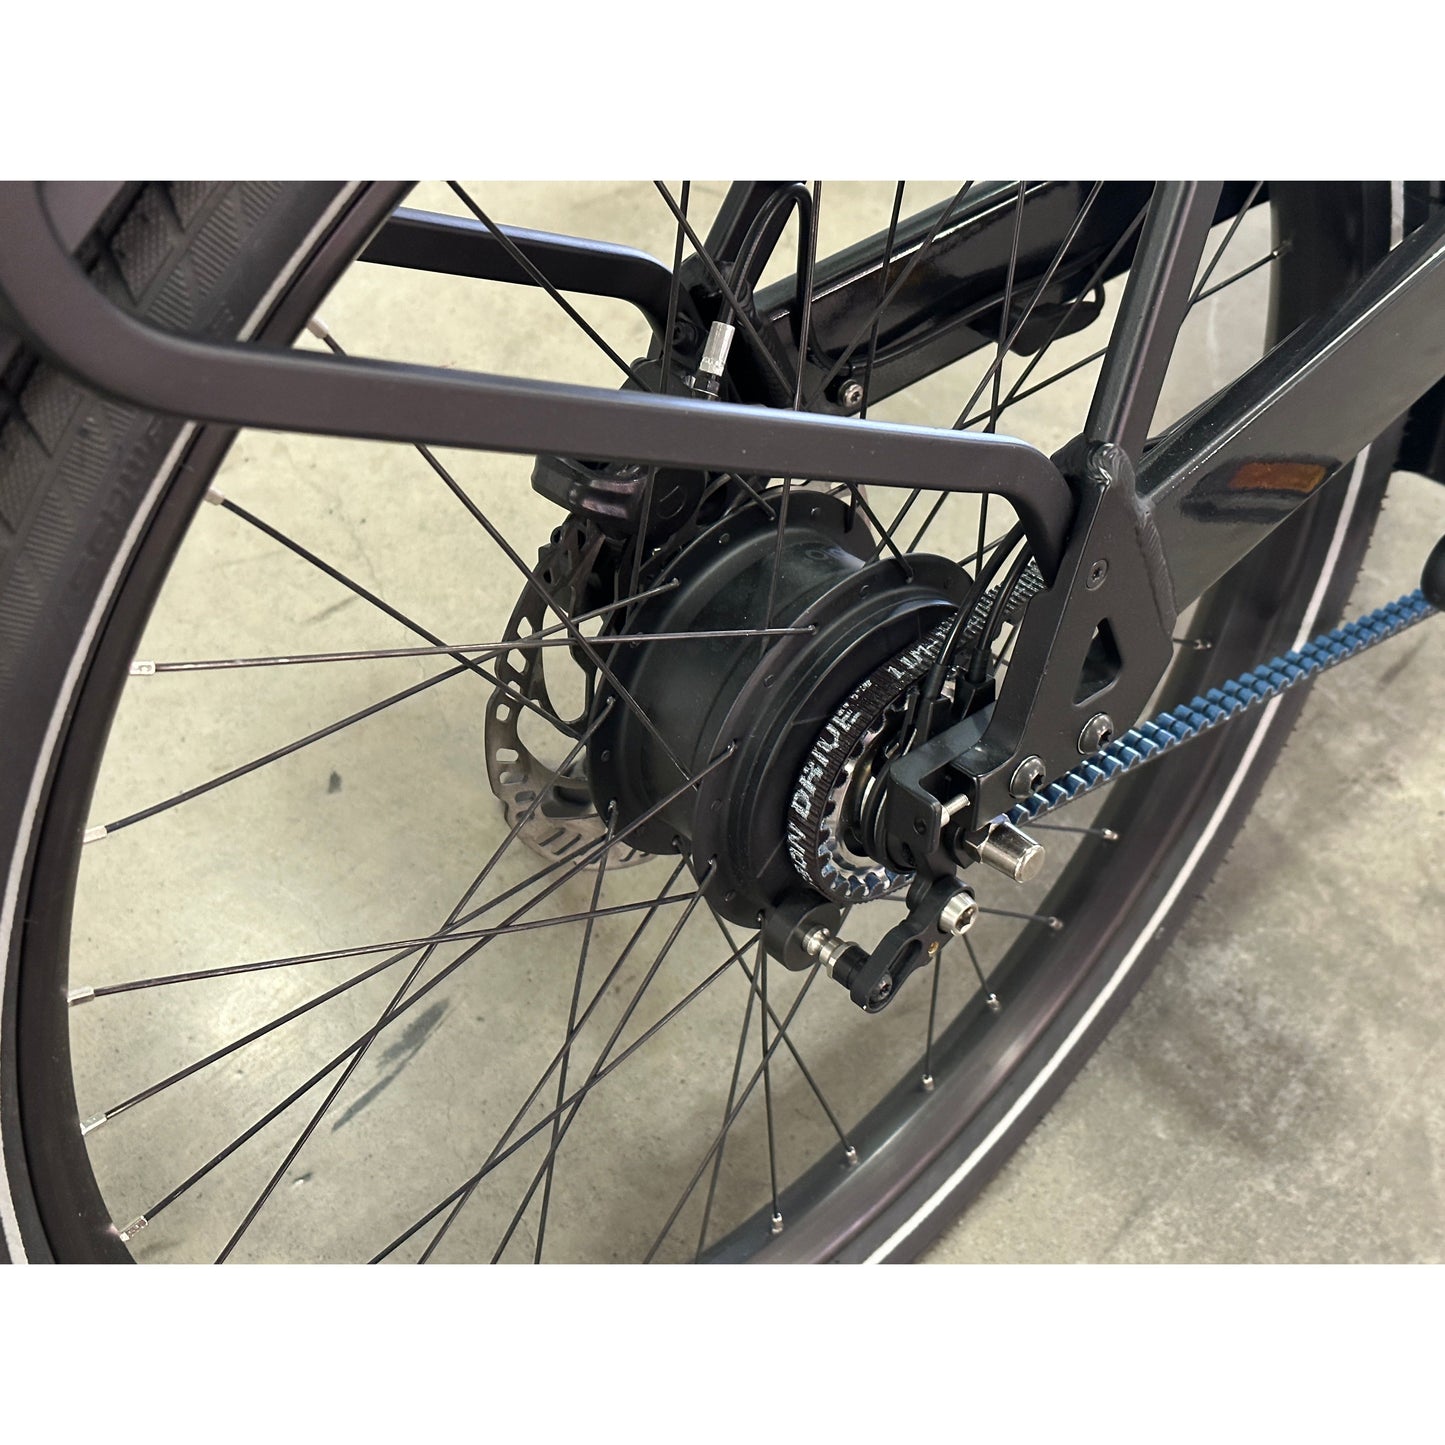 USED - Riese & Muller - Nevo (26") Low Step Through - Power in Motion - Electric Bike - Riese & Muller - Canada - Calgary - Alberta